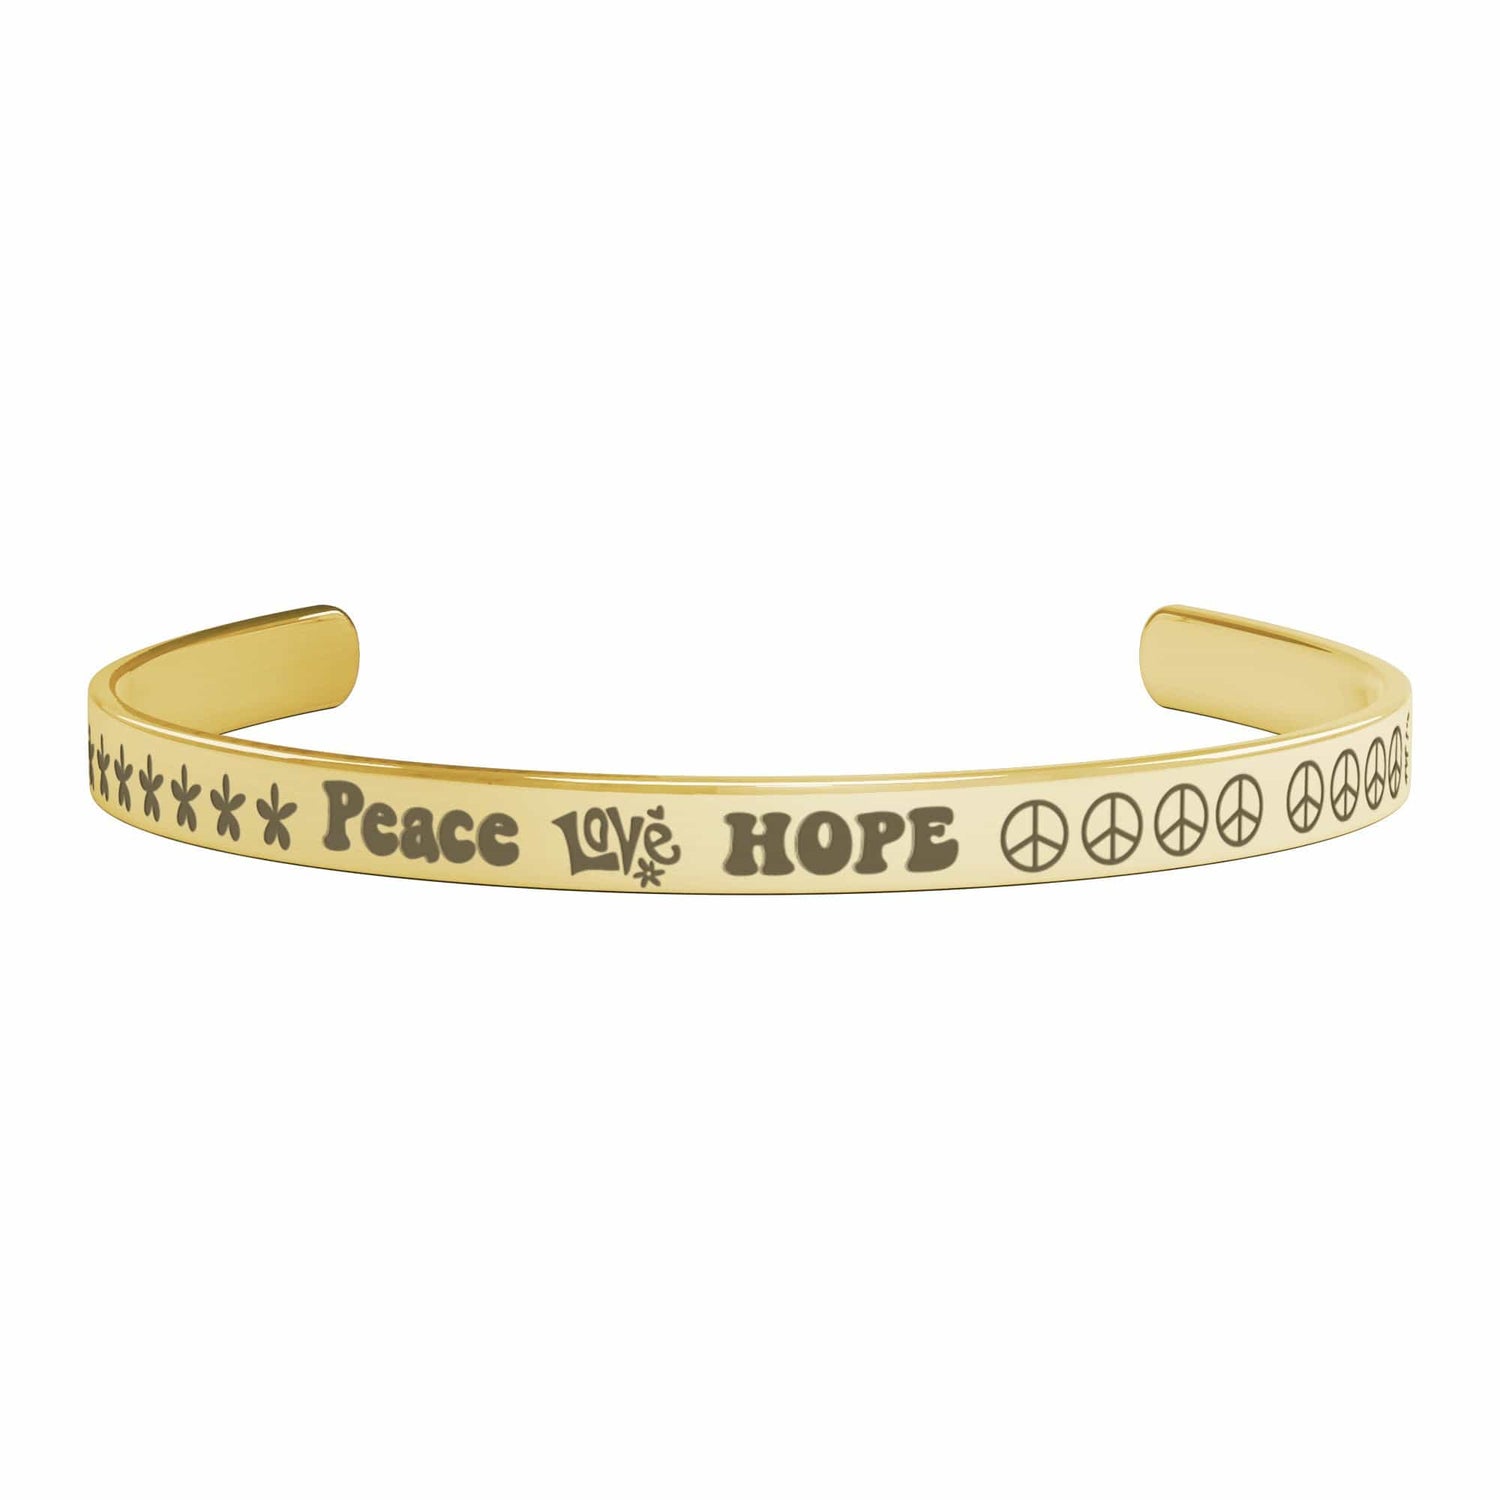 Retro Cuff Bracelet, Peace, Love, Hope, Mod Daisy, Peace Sign, Special Bracelet Gift For Her Jewelry